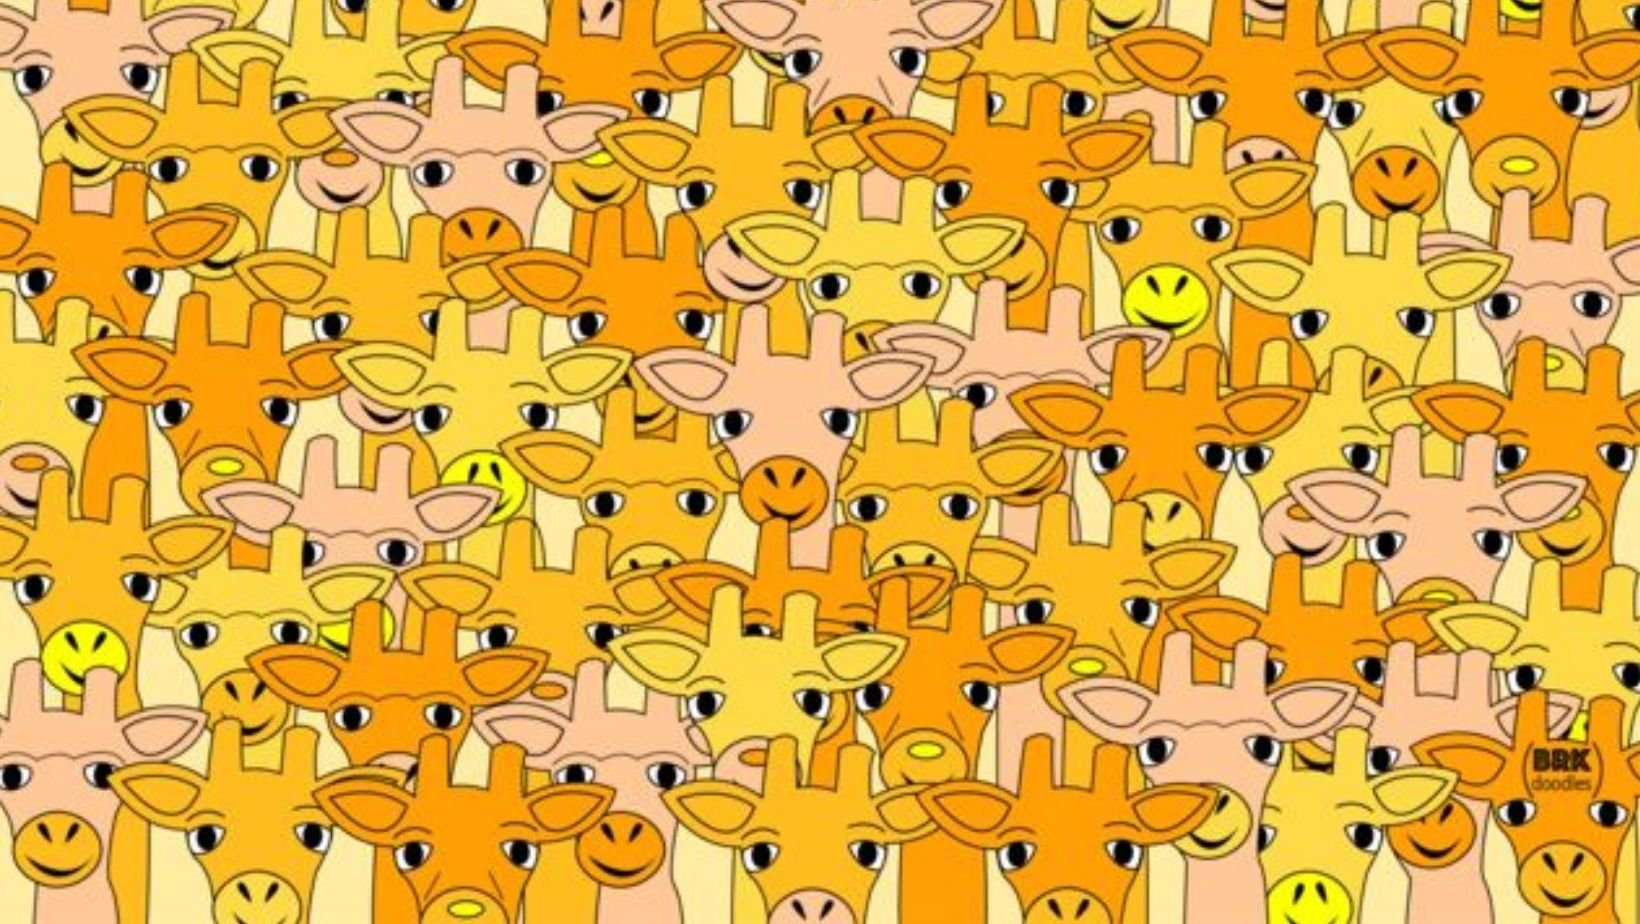 cover 6.jpg?resize=1200,630 - Master Yoda Is Hiding Among These Giraffes, Can You Spot Him?